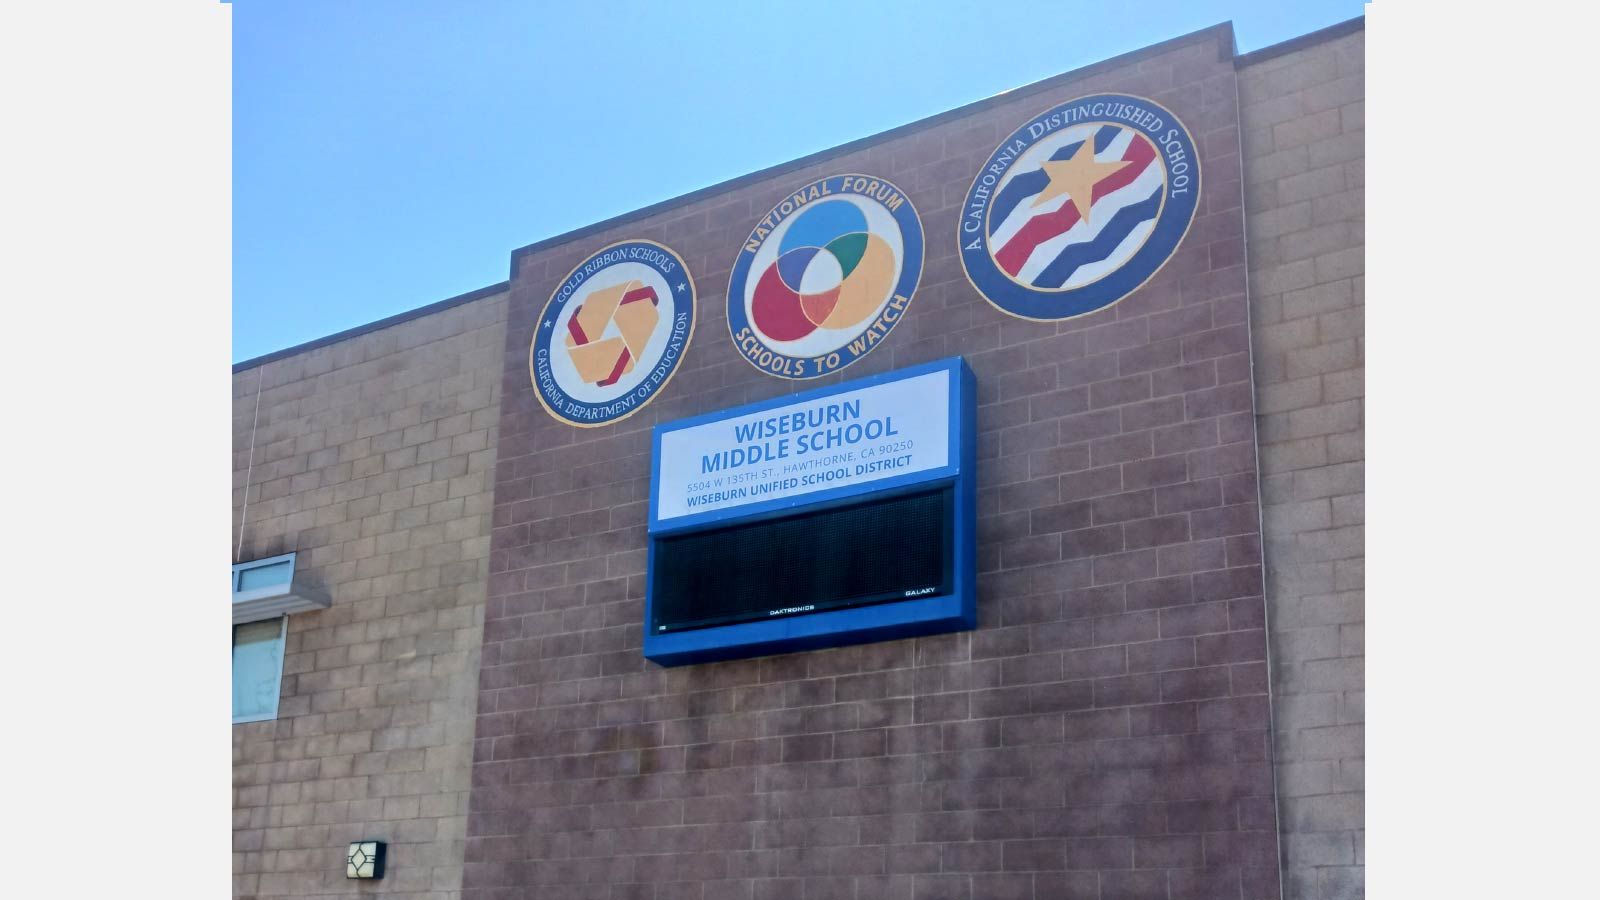 Wiseburn Middle School banner put up high on the building